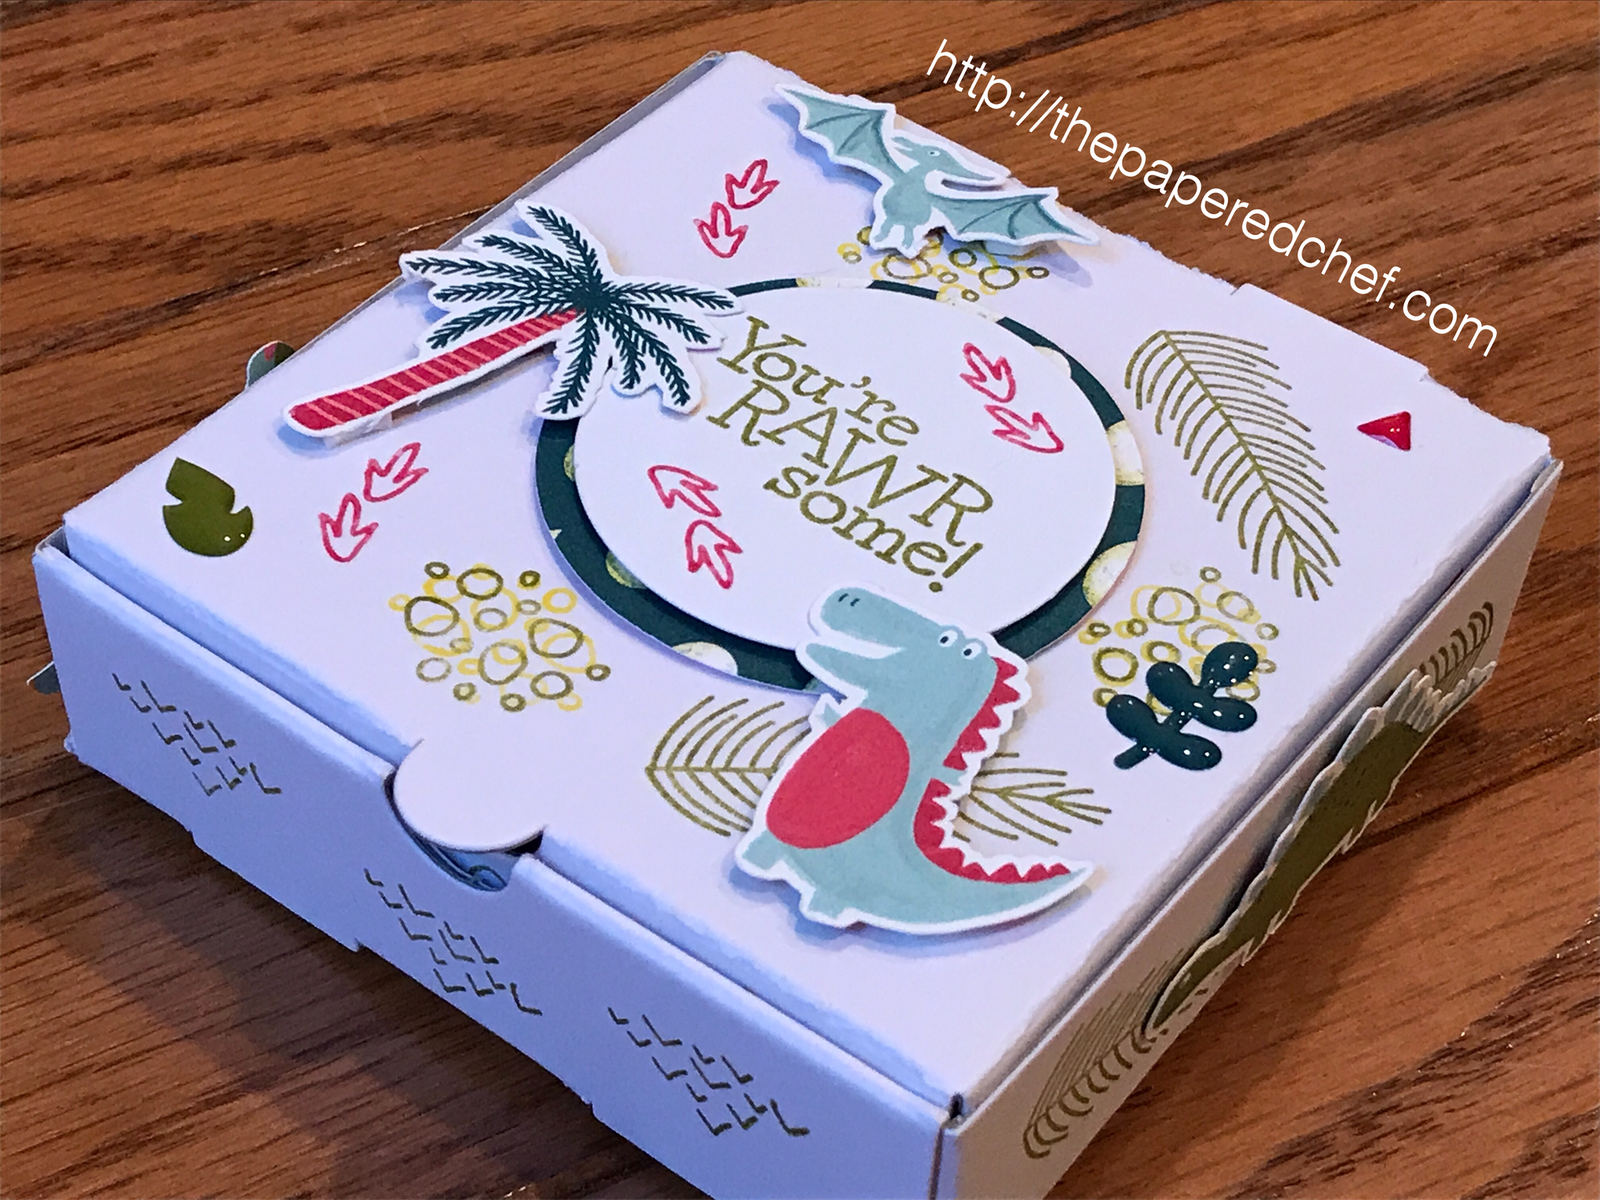 Dinoroar and Dino Days Mini Pizza Box by Stampin' Up!